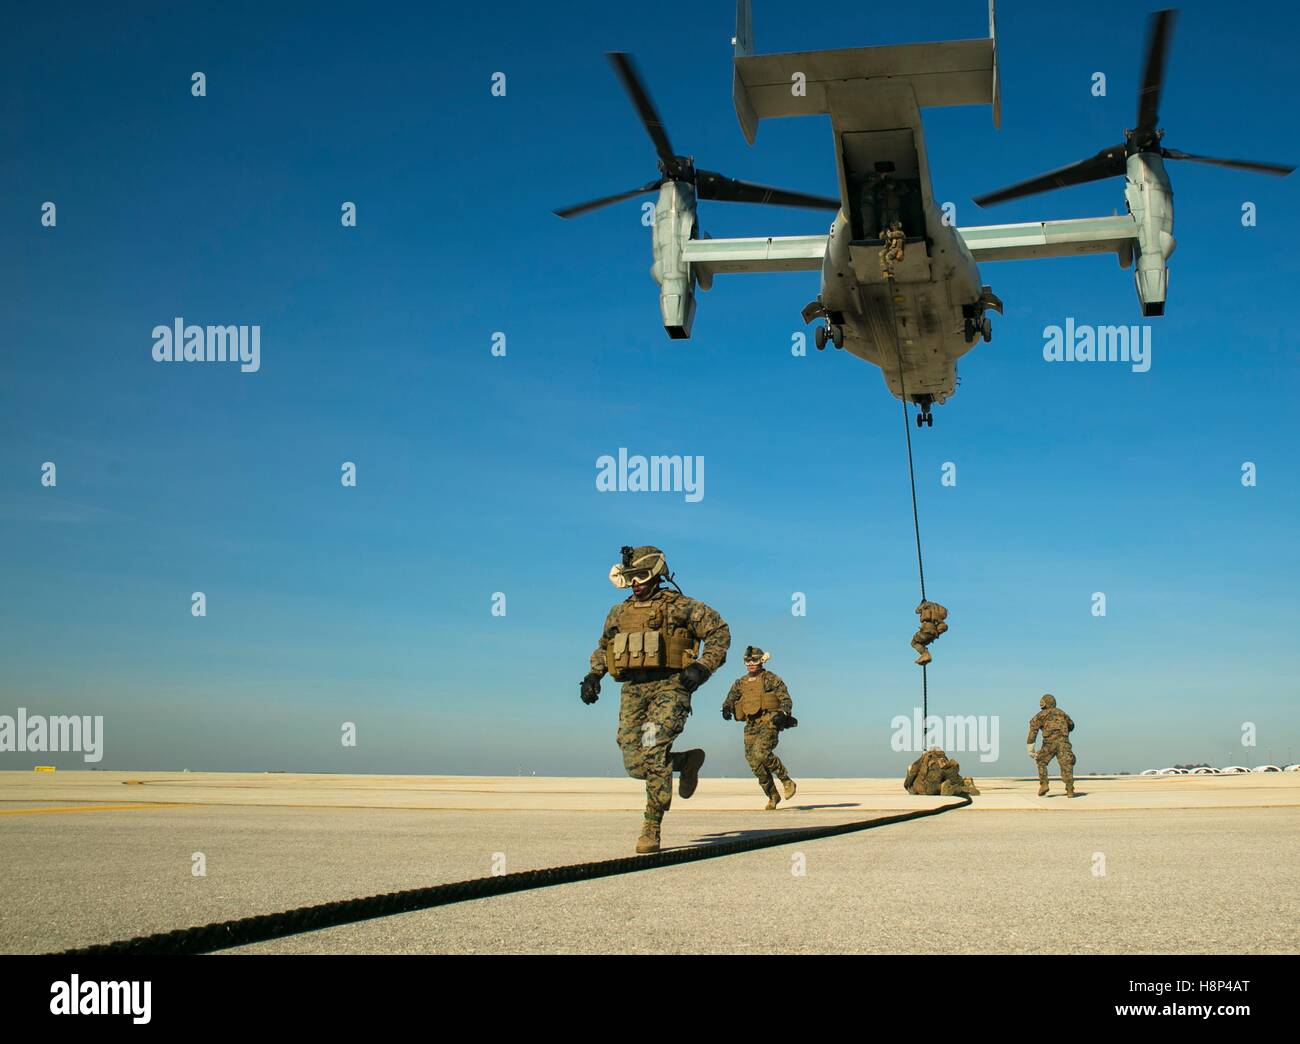 U.S. Marine soldiers secure a landing zone from an MV-22 Osprey tiltrotor aircraft during insertion training at the Moron Air Base January 27, 2015 in Sevilla, Spain. Stock Photo